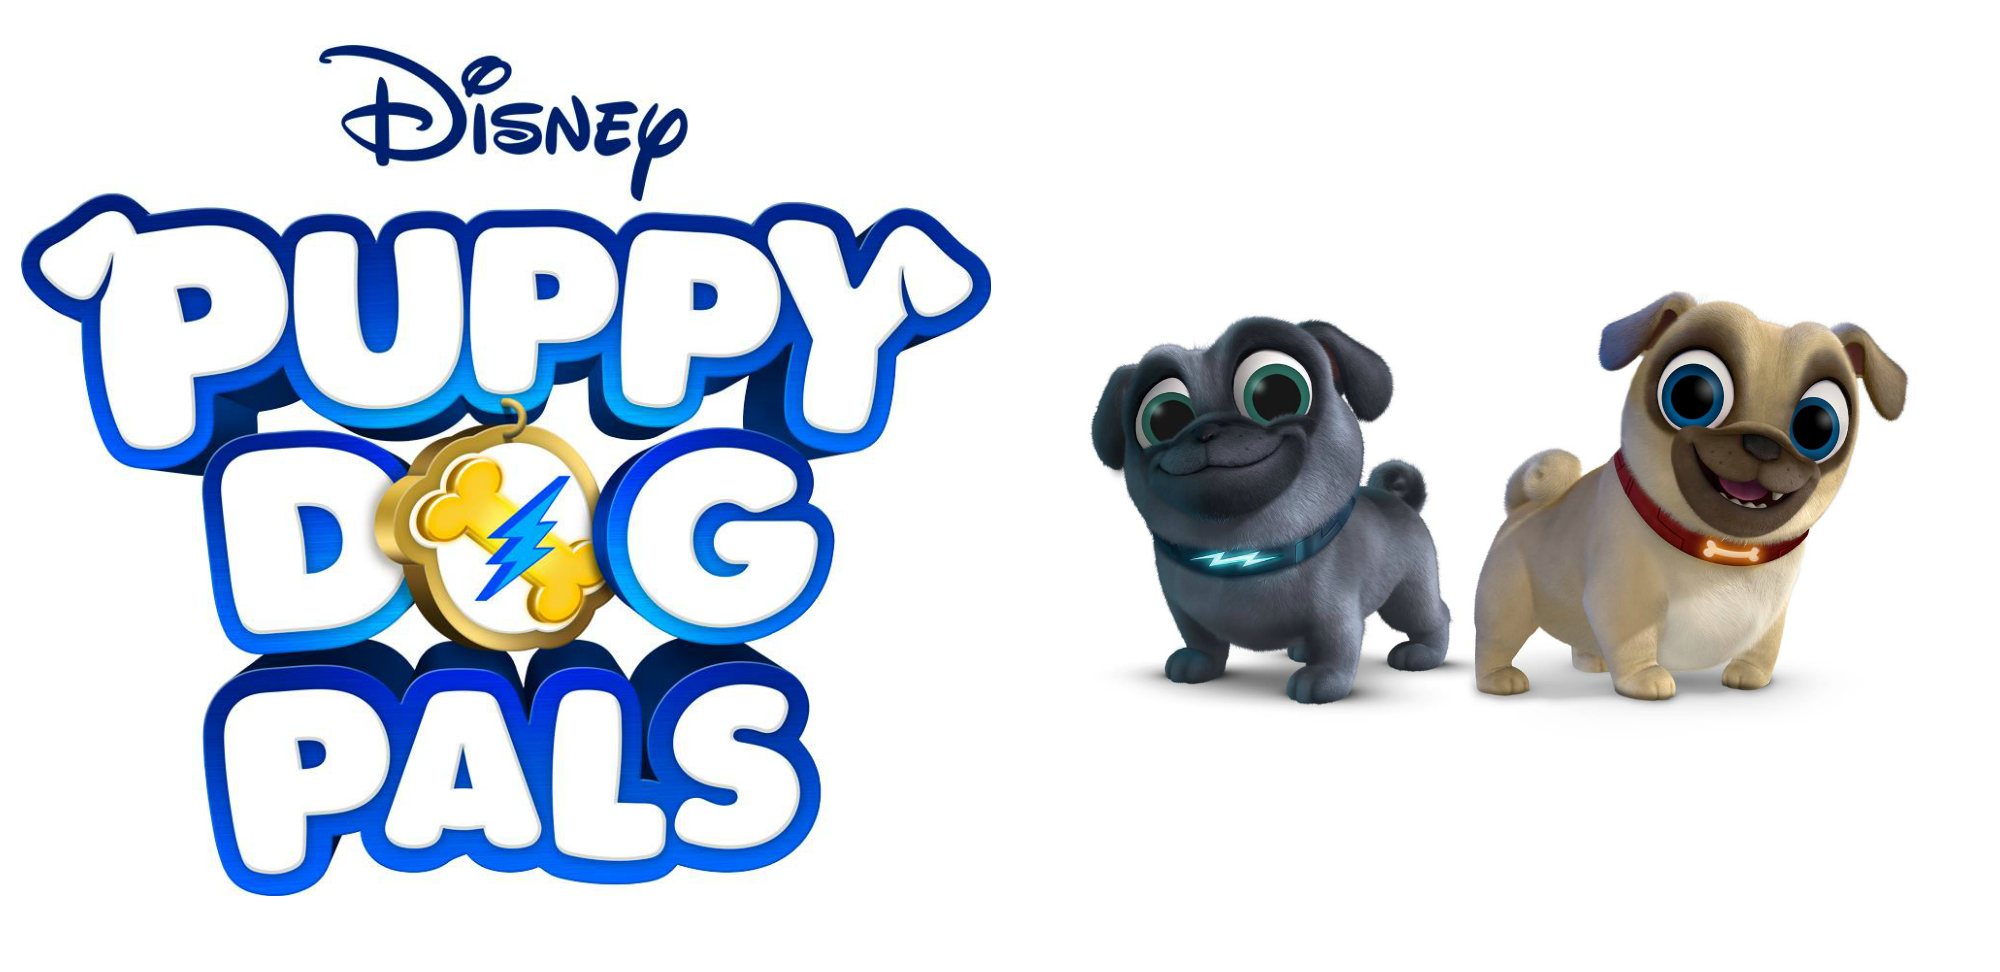 Puppy dog pals controversy